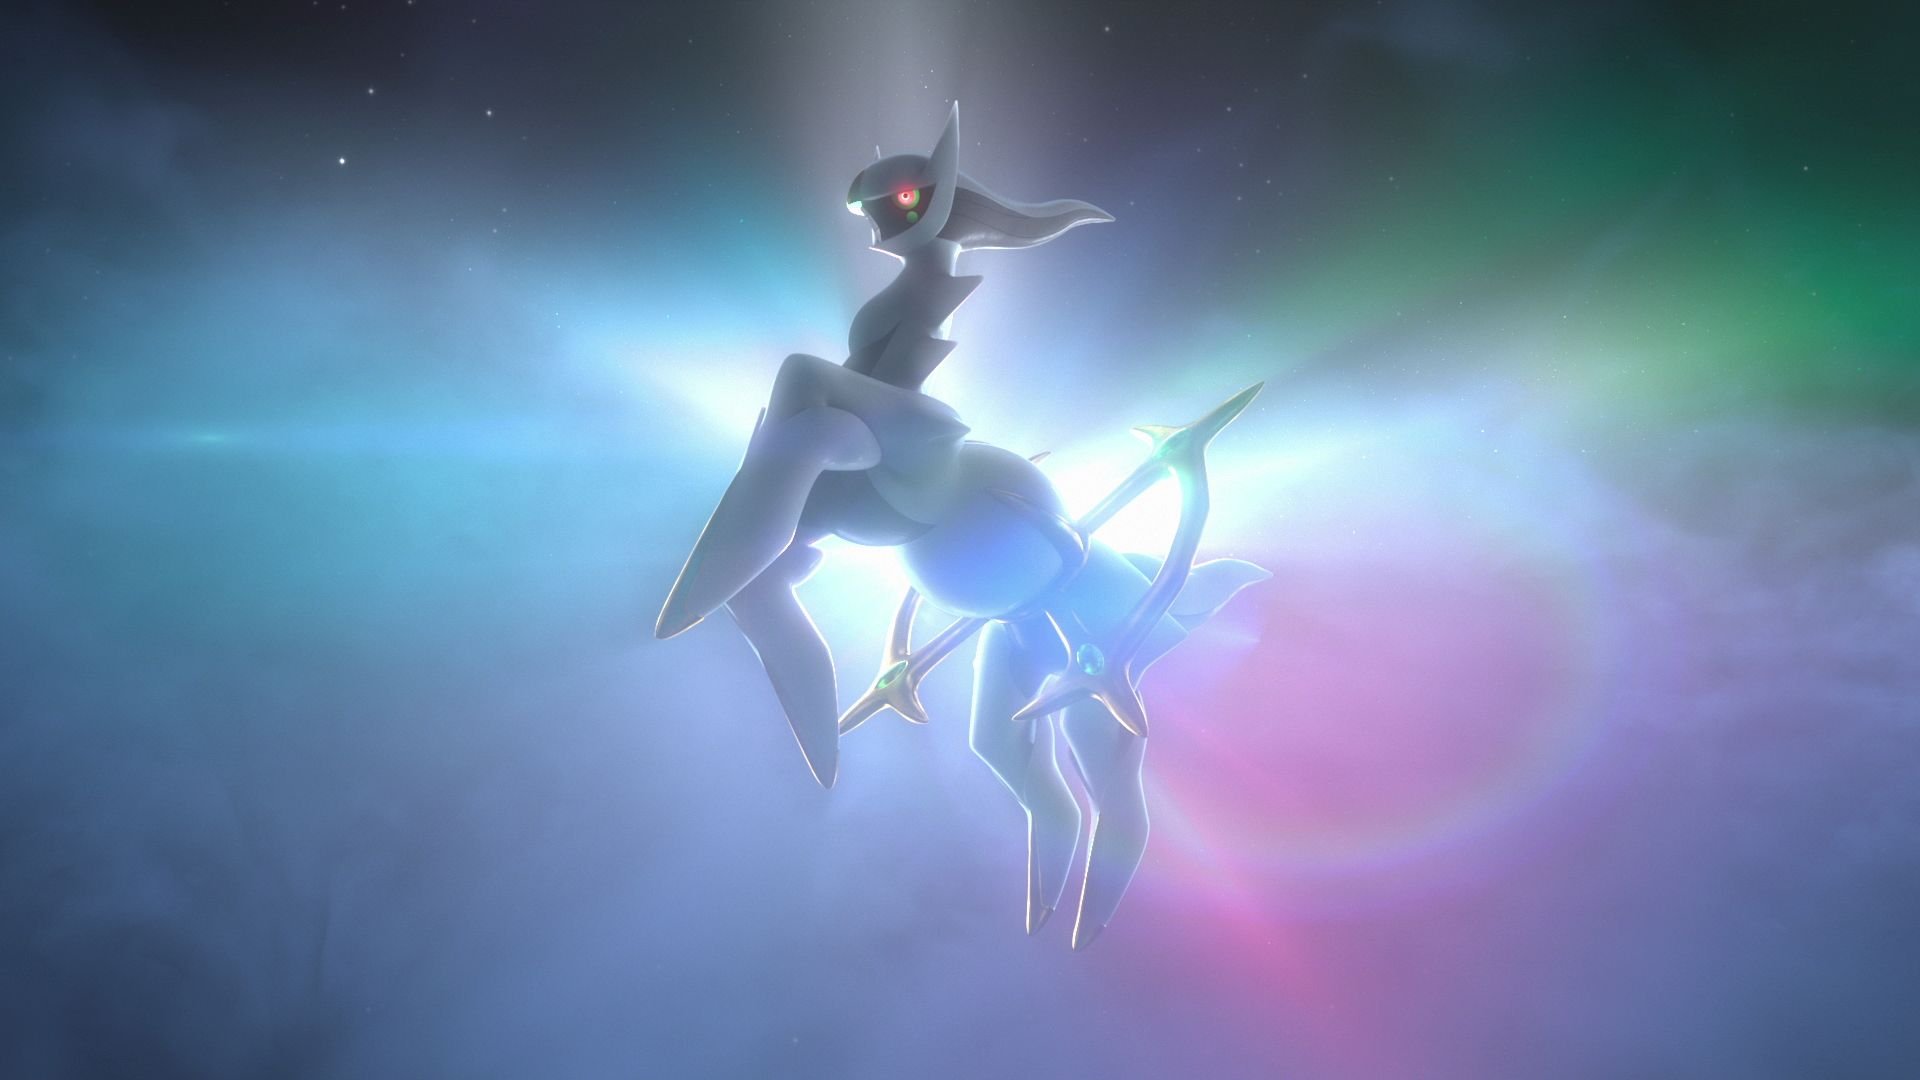 Nintendeal on X: Last chance to get these Pokémon Legends: Arceus